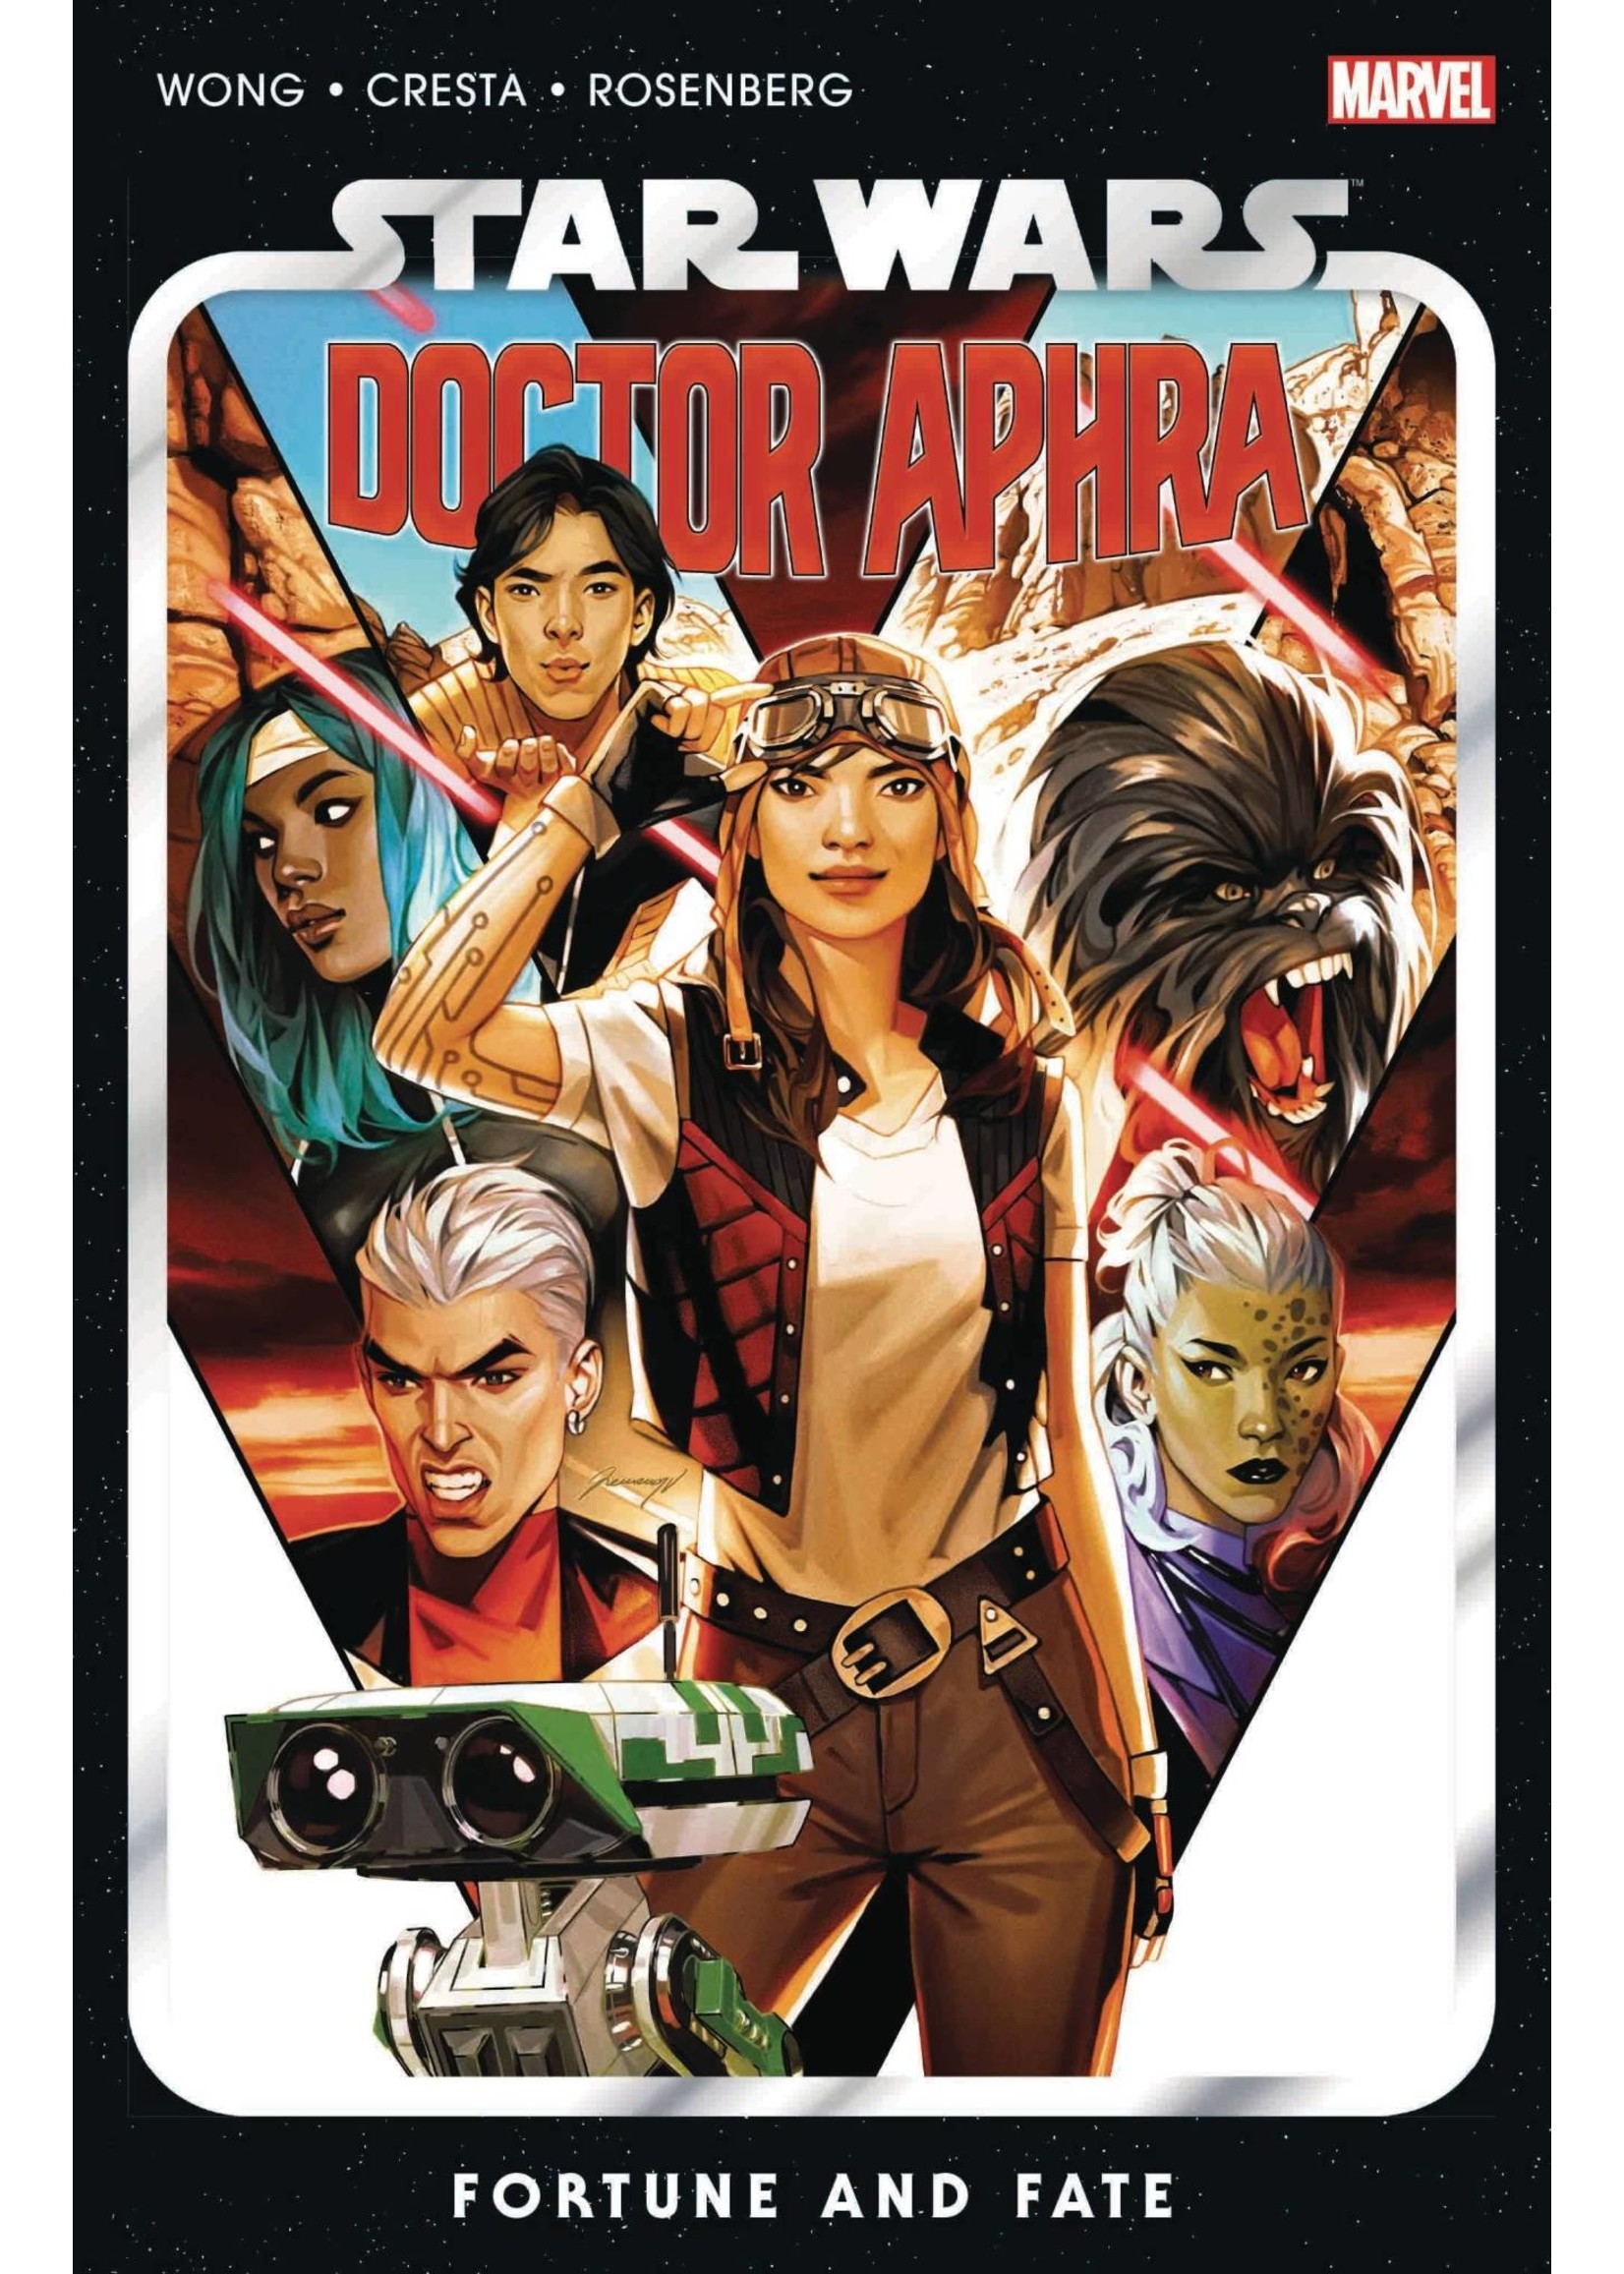 MARVEL COMICS STAR WARS DOCTOR APHRA TP VOL 01 FORTUNE AND FATE